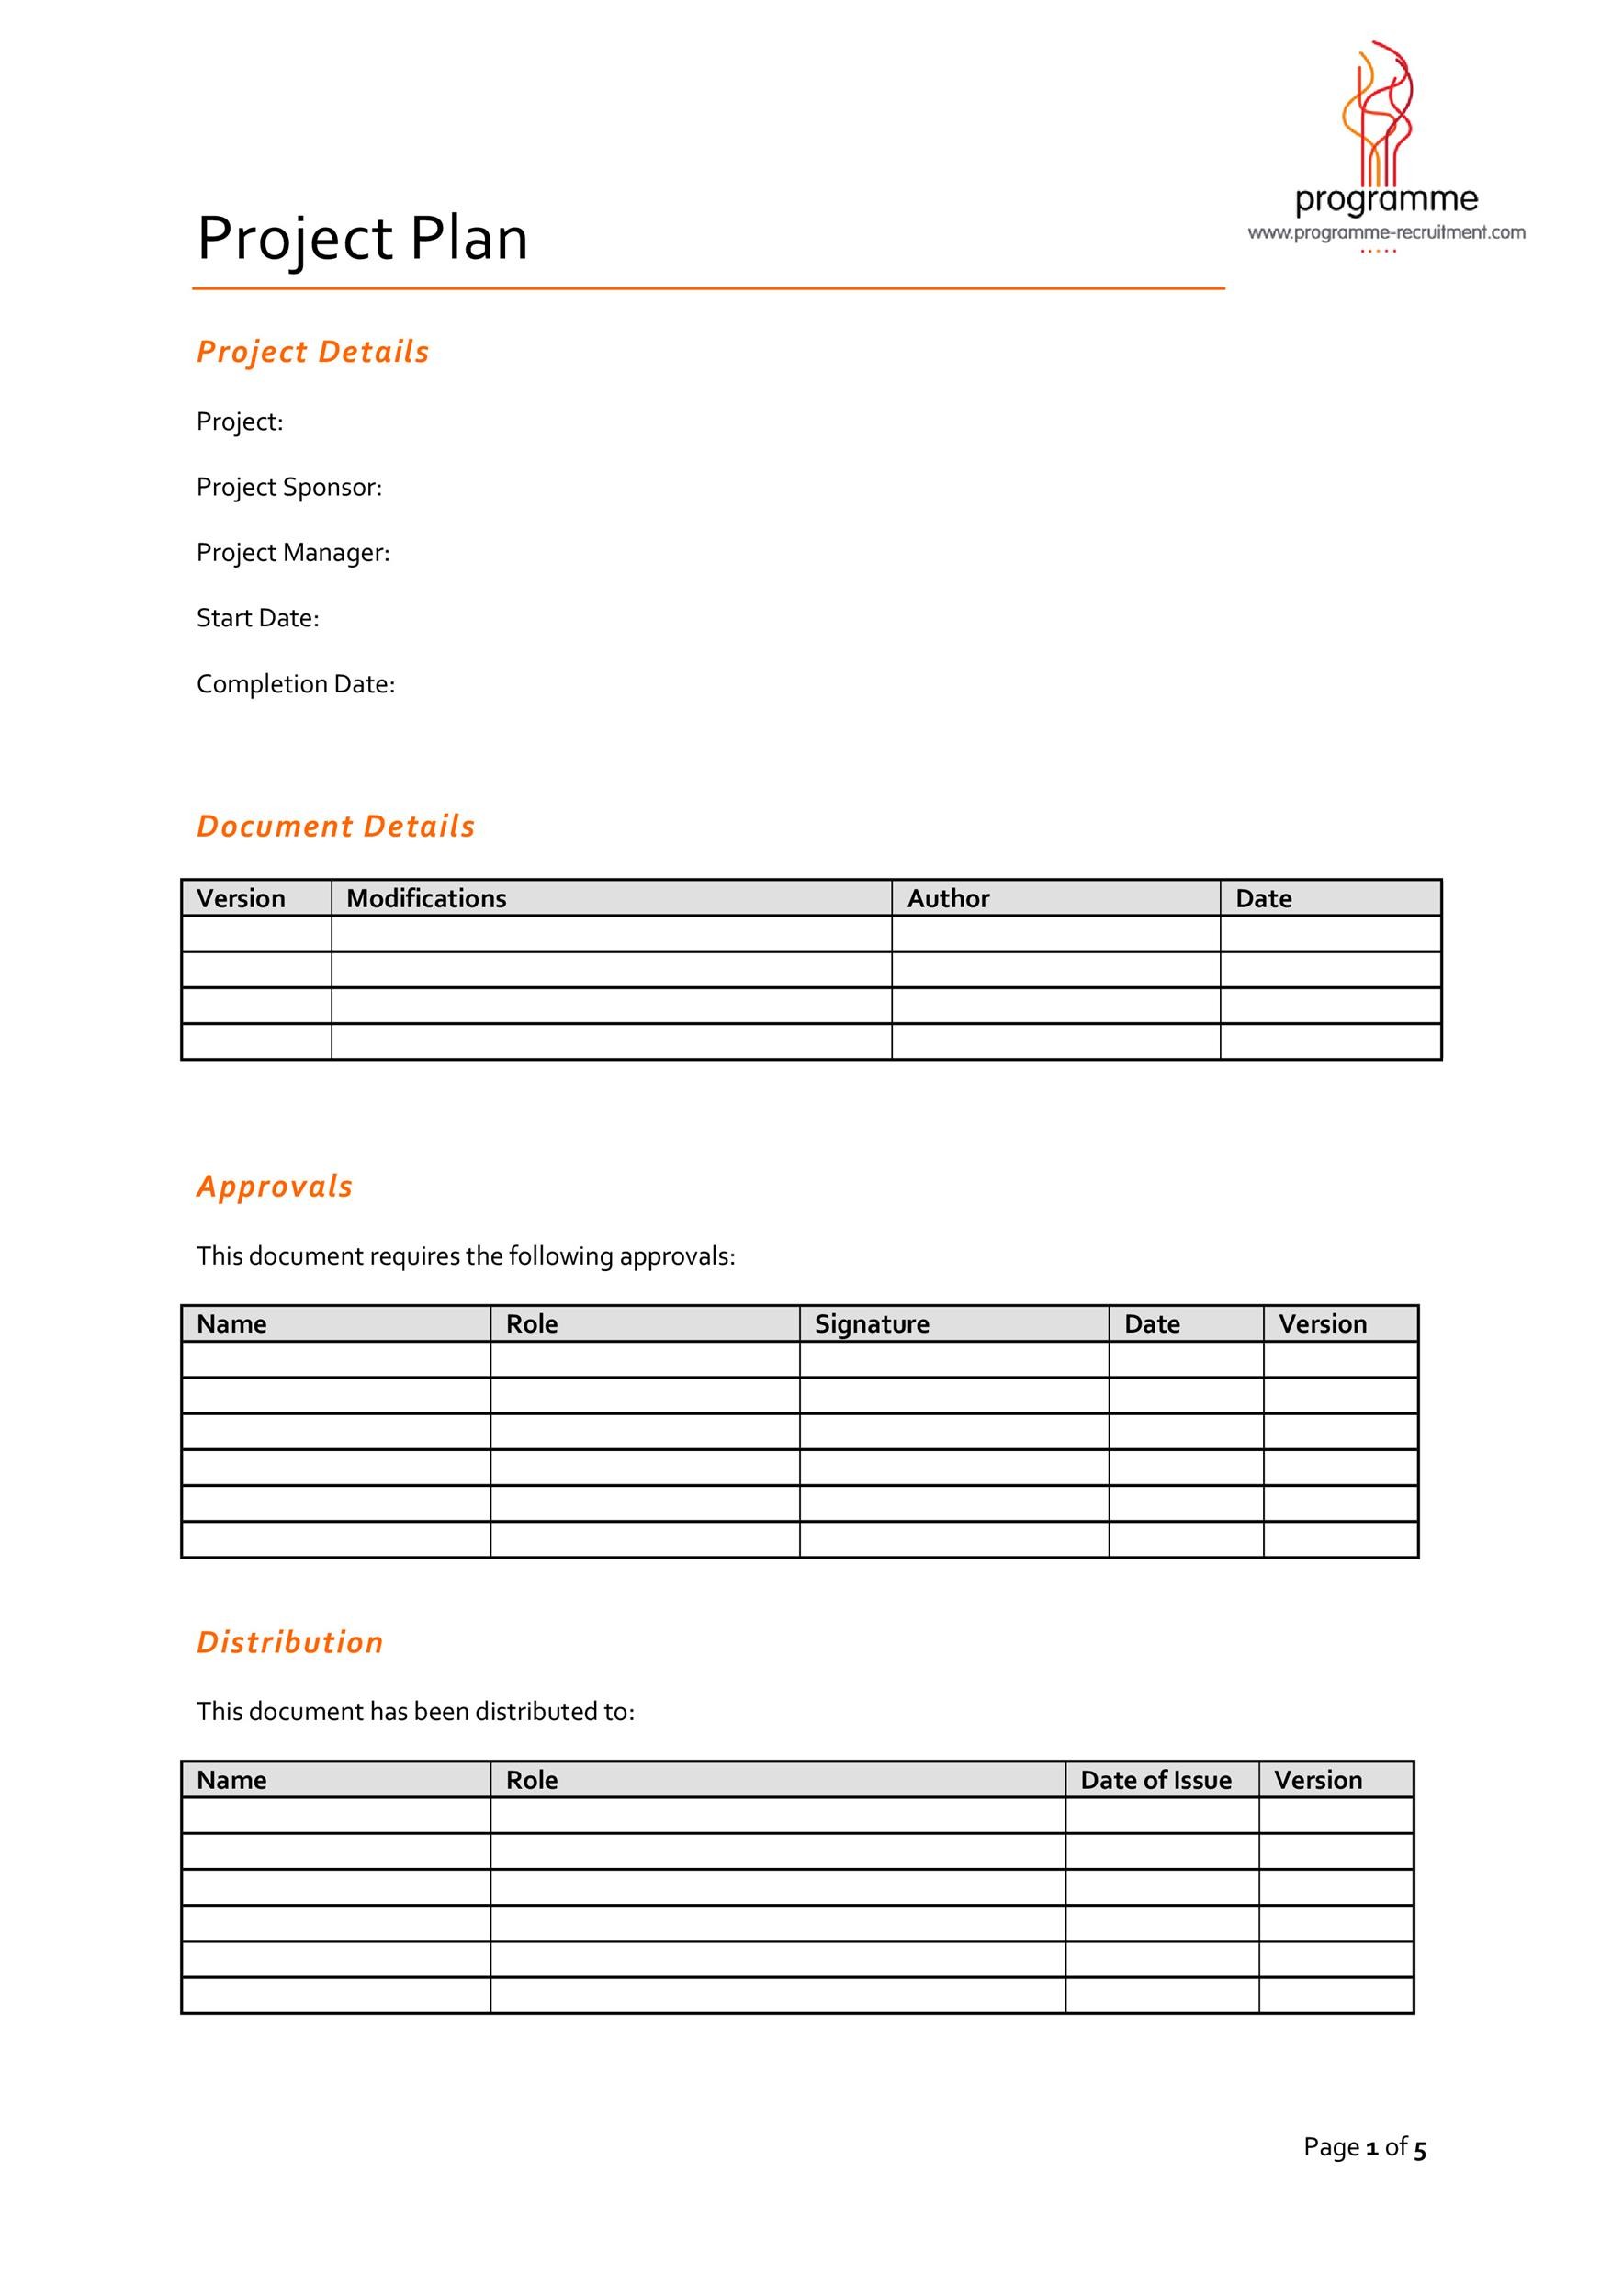 48-professional-project-plan-templates-excel-word-pdf-templatelab